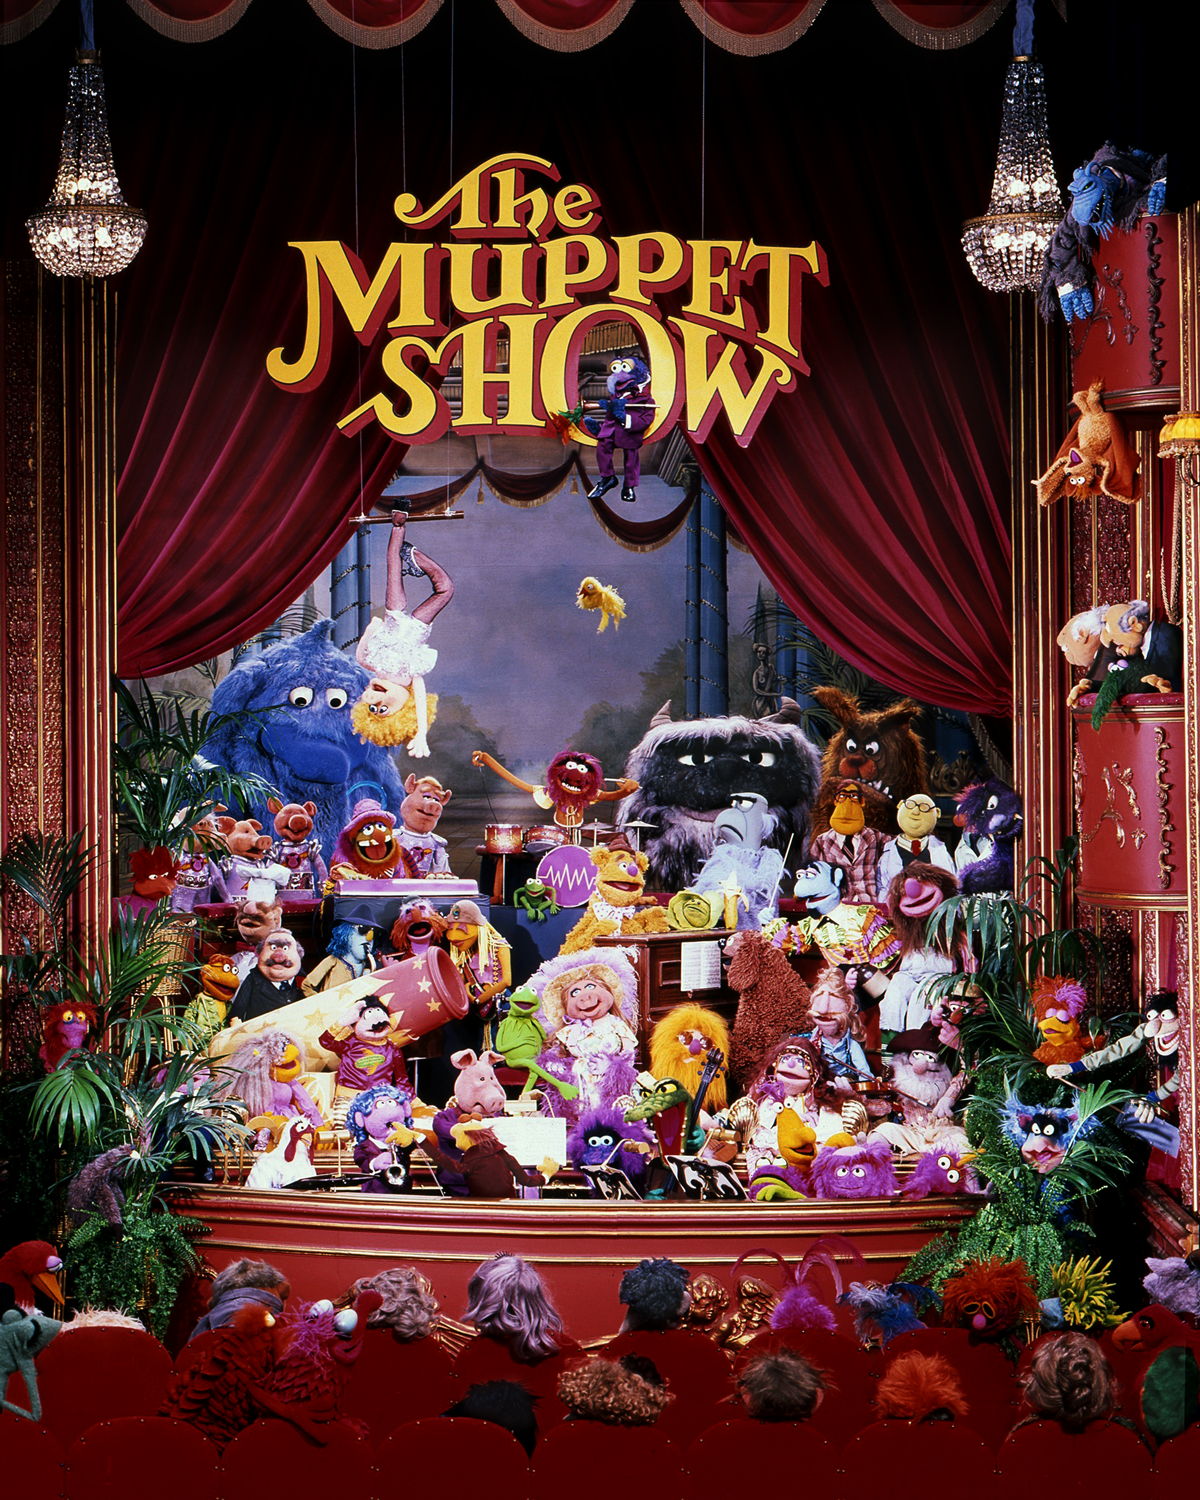 At long last, The Muppet Show arrives on Disney Plus